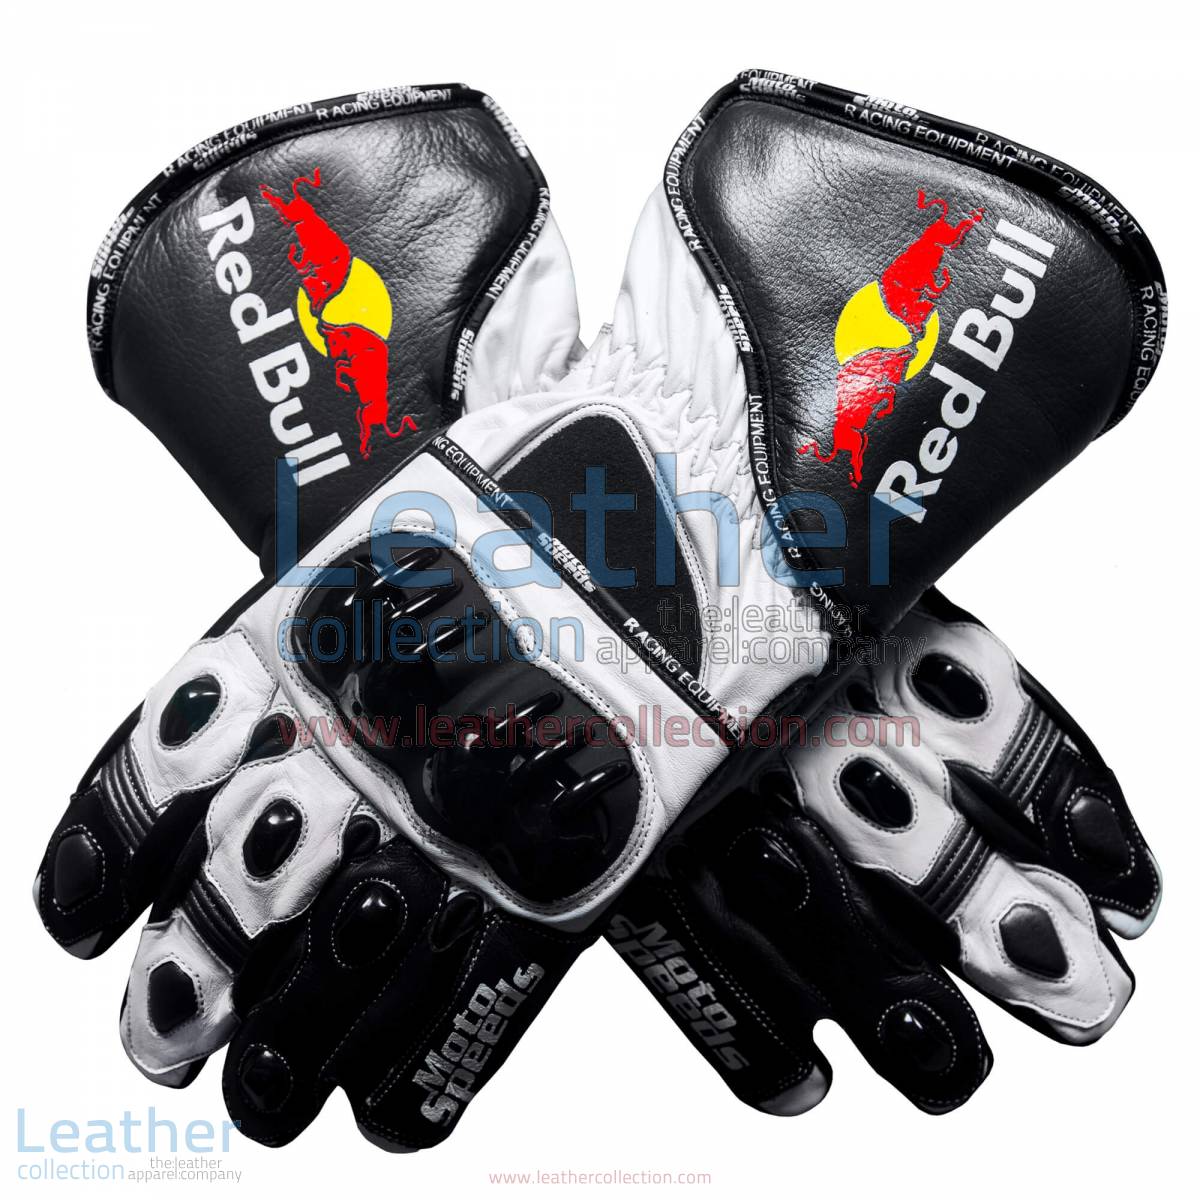 Red Bull Motorcycle Leather Gloves | red bull motorcycle leather gloves